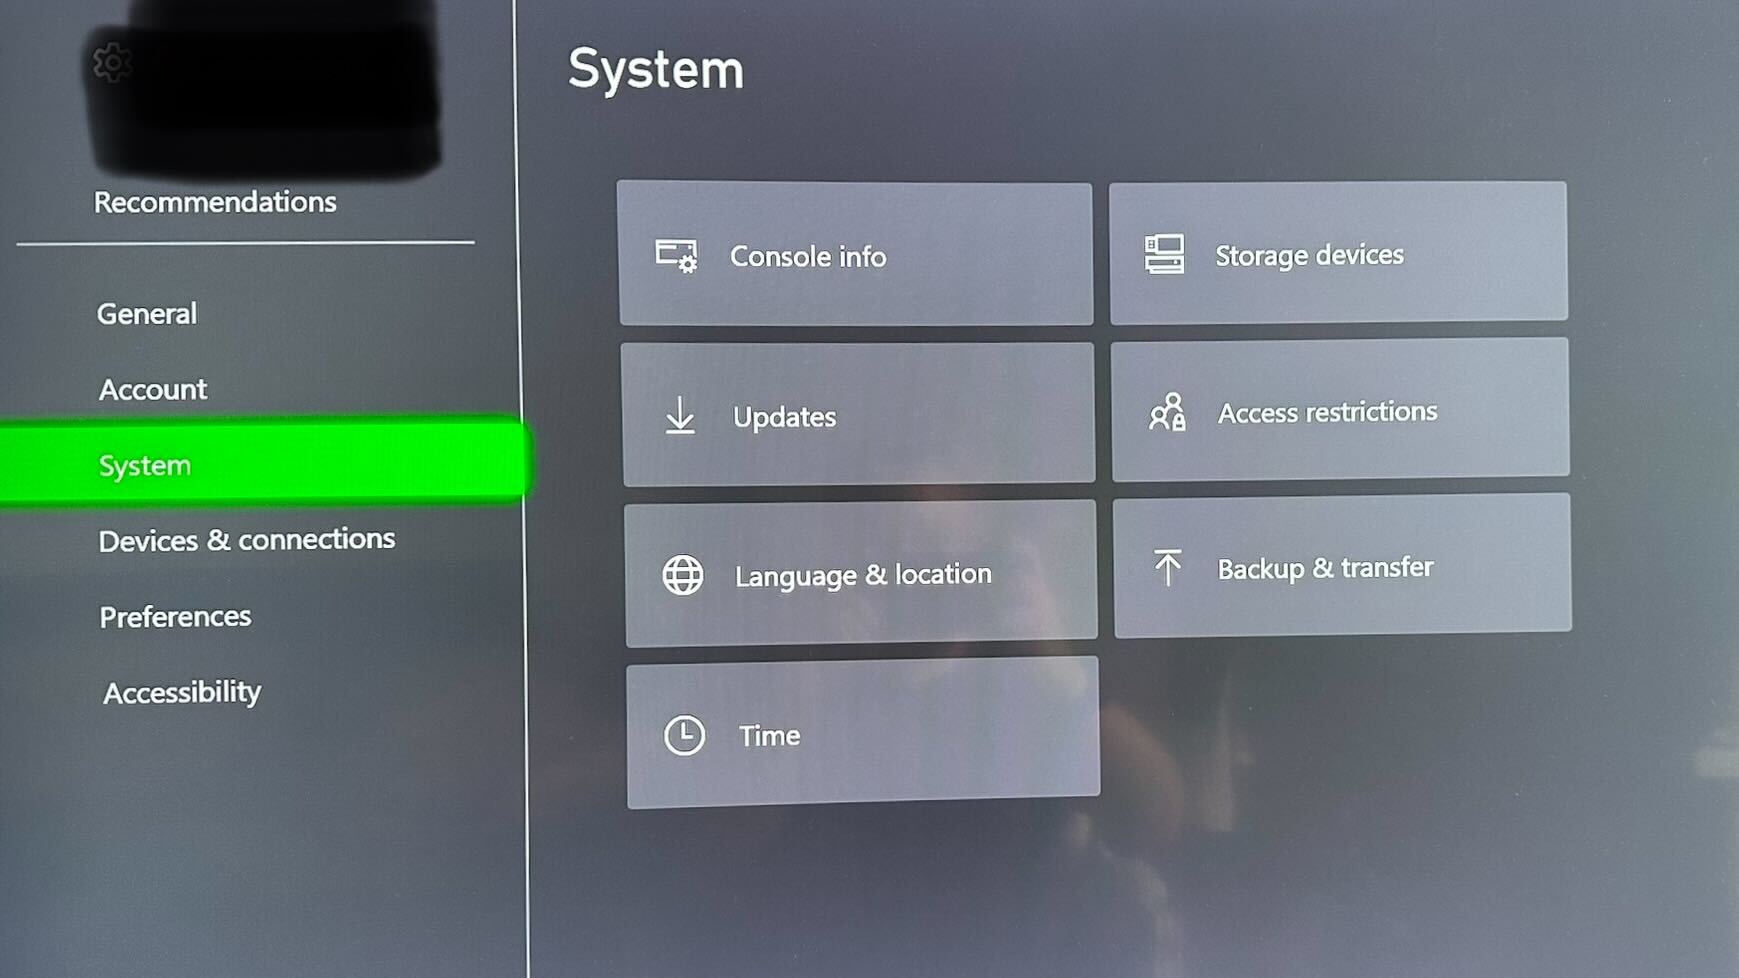 Select "Settings" and then go to "All Settings".
Select "System" and then choose "Console info".